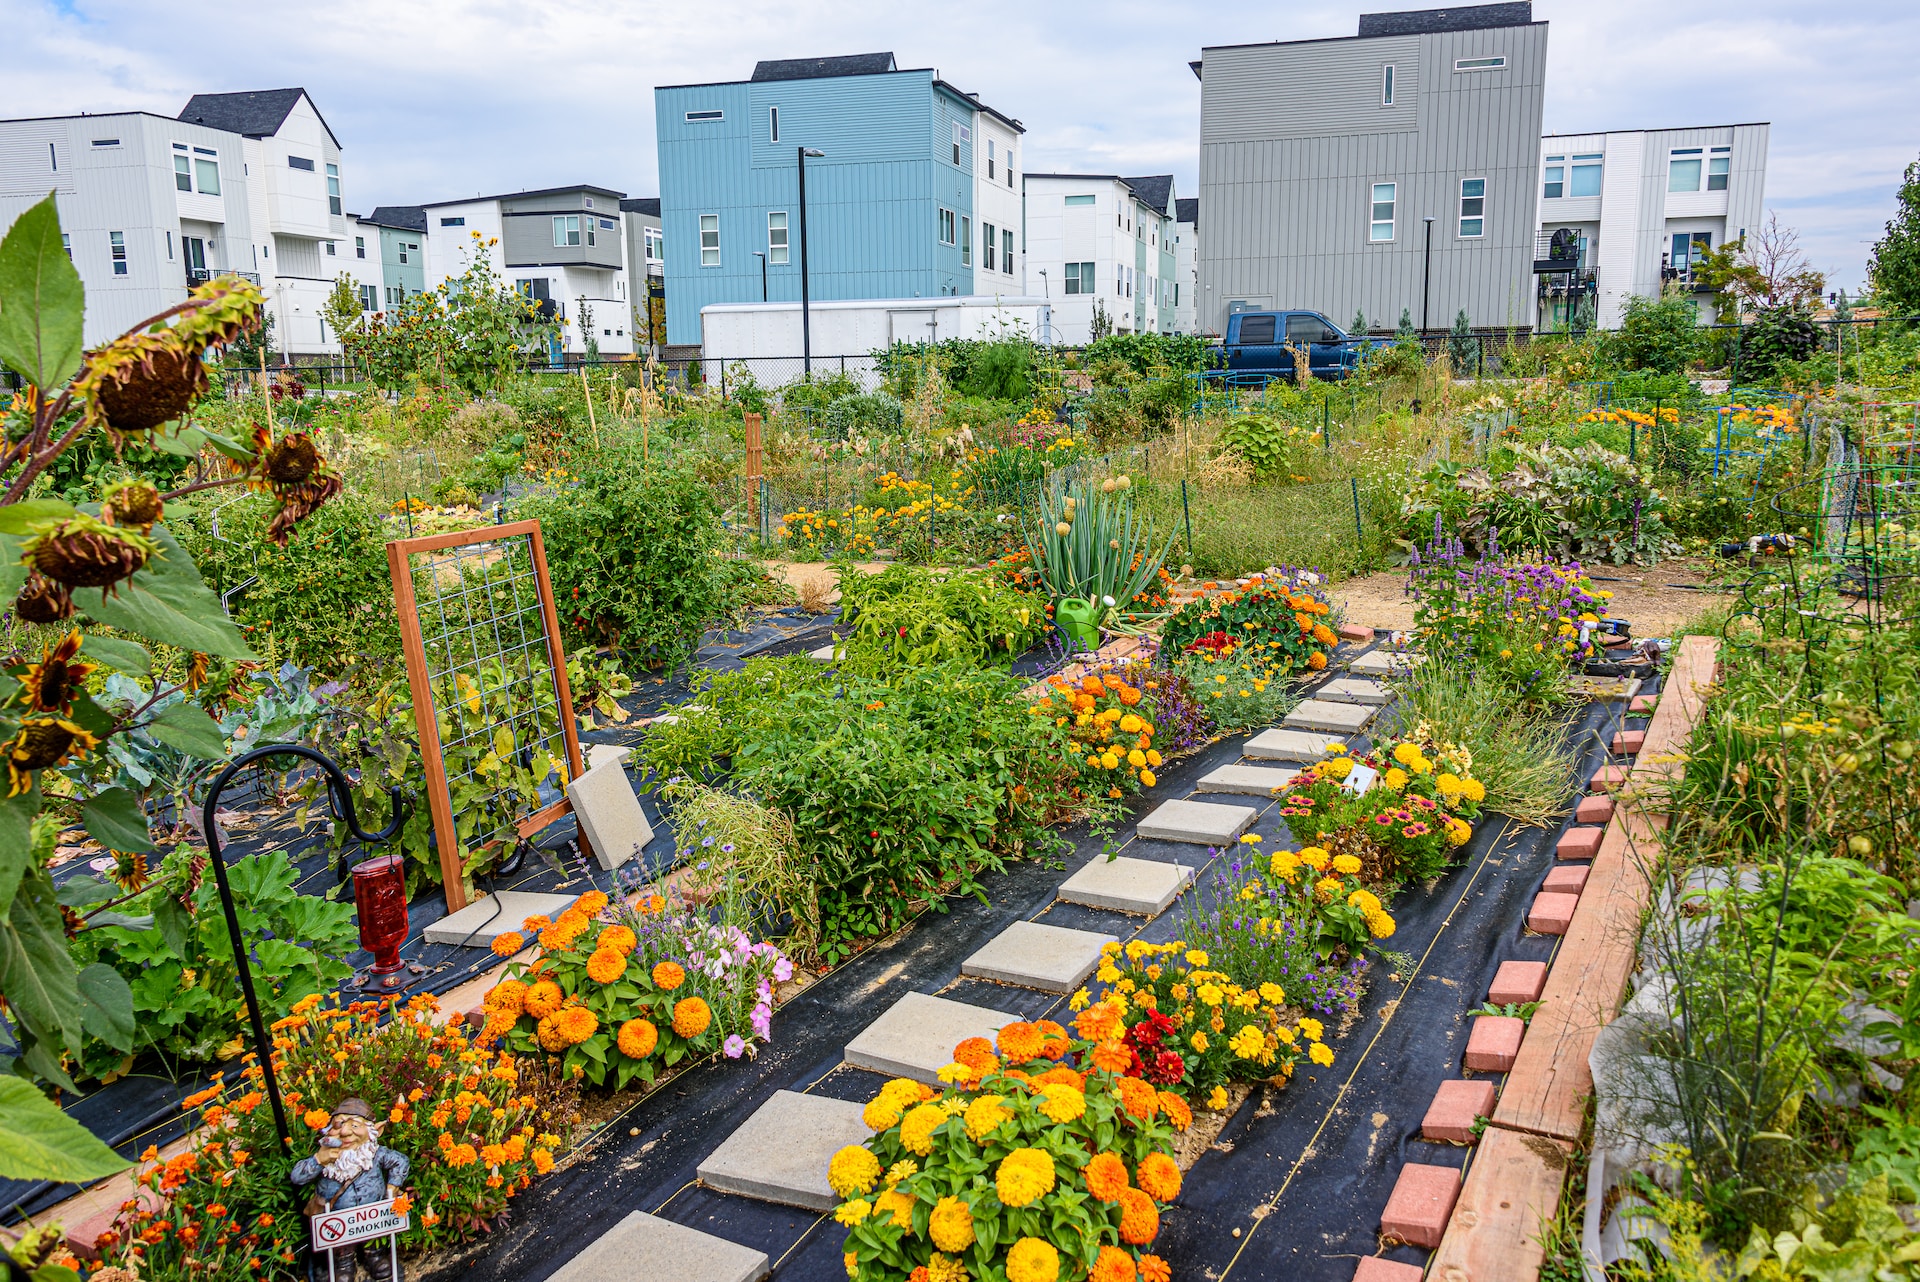 Community garden, a variety of flowers